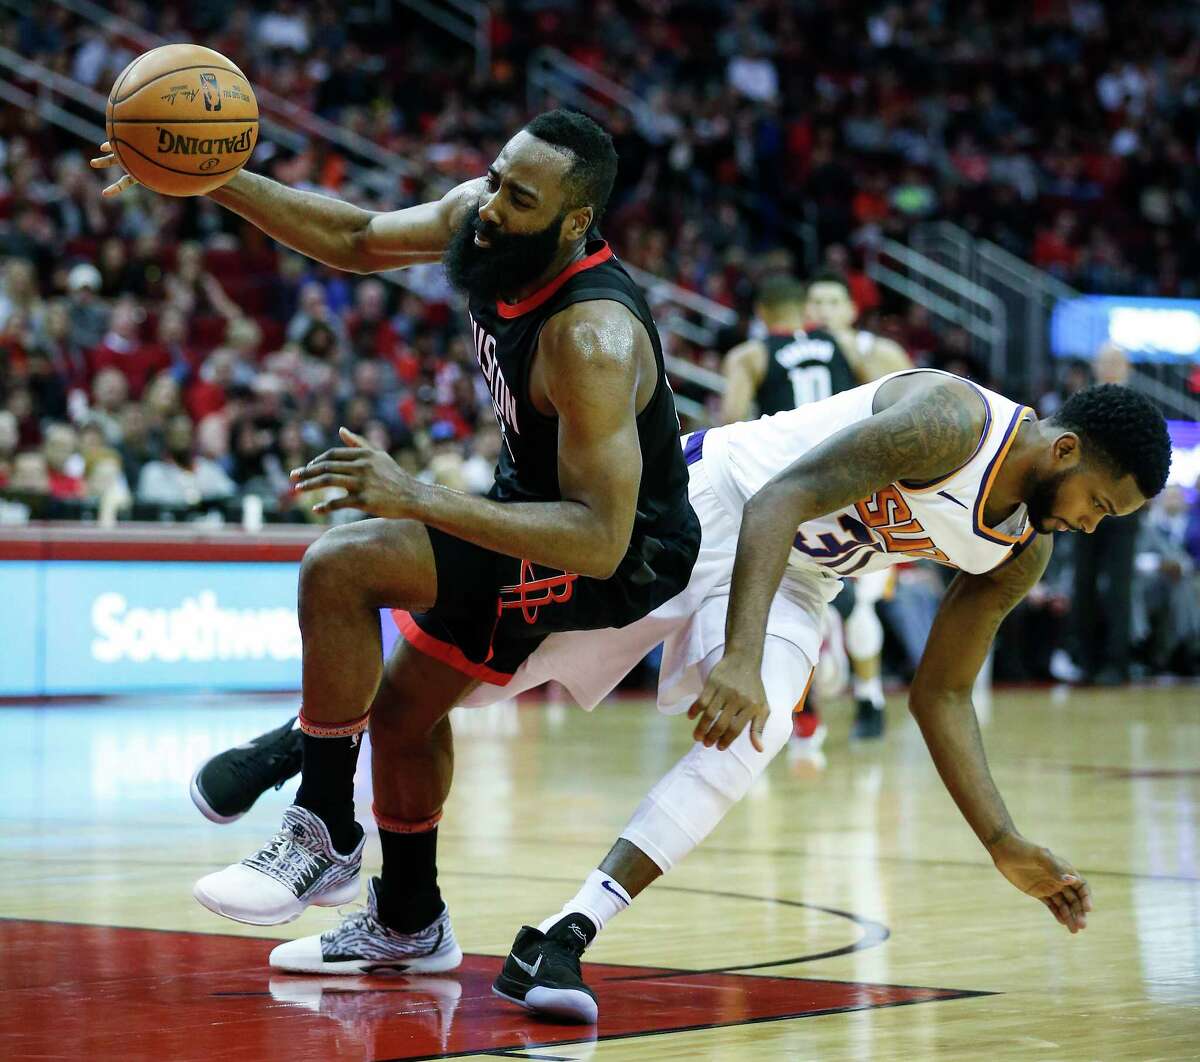 Houston Rockets guard James Harden (13) and Phoenix Suns guard Troy Daniels (30) collide on a pass to Harden during the second quarter of an NBA basketball game at Toyota Center on Sunday, Jan. 28, 2018, in Houston.